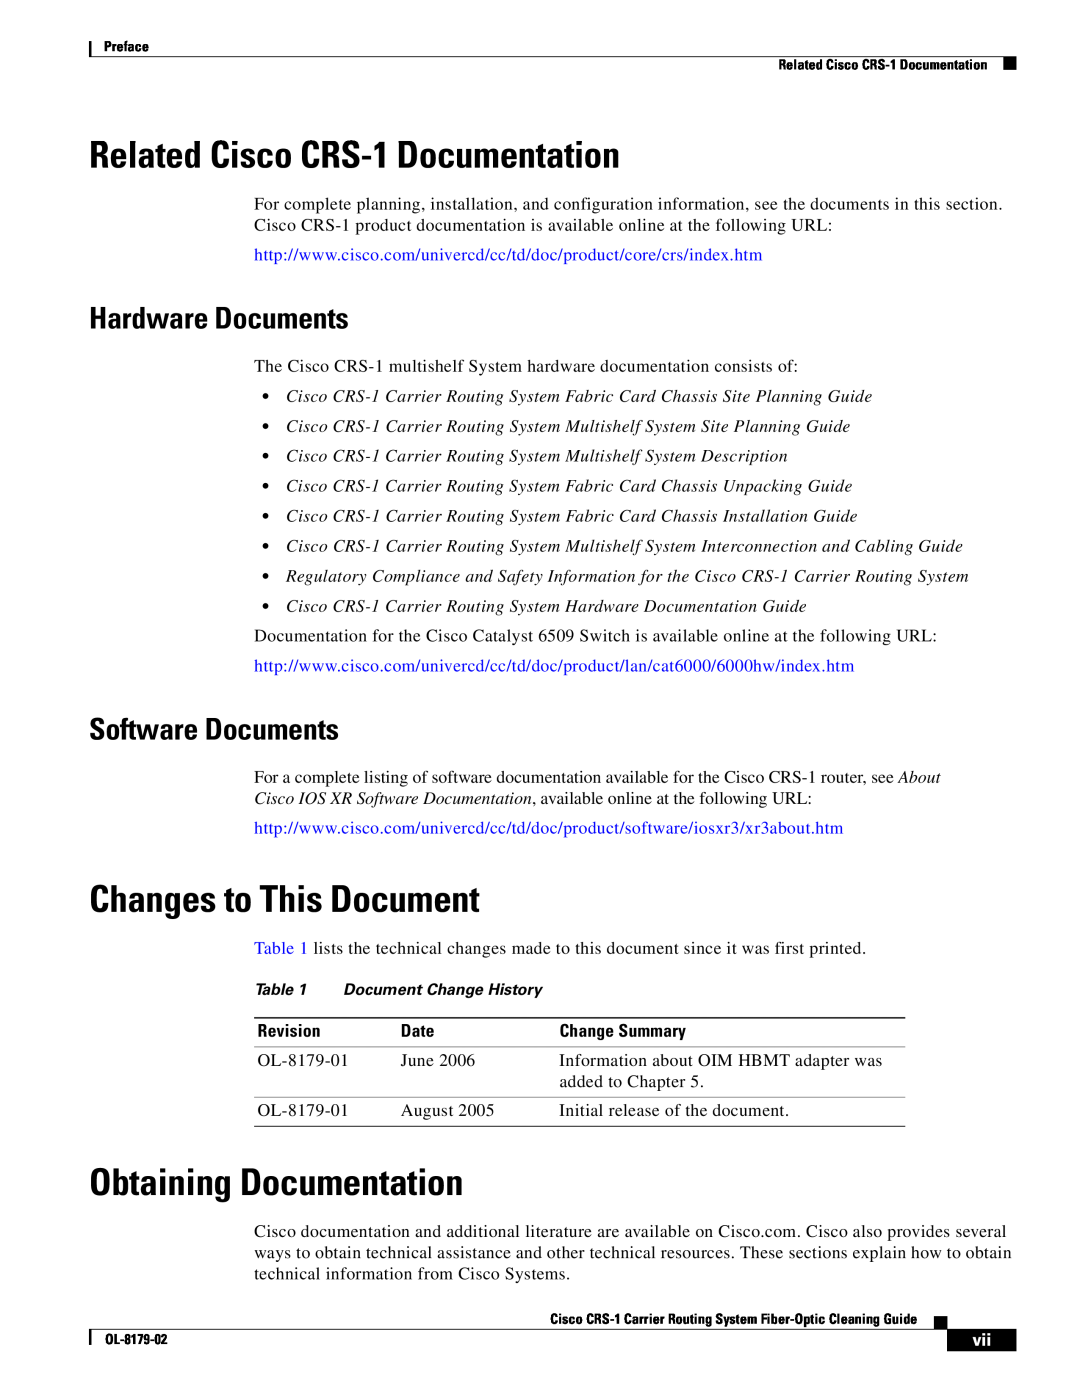 Cisco Systems Related Cisco CRS-1Documentation, Changes to This Document, Obtaining Documentation, Hardware Documents 